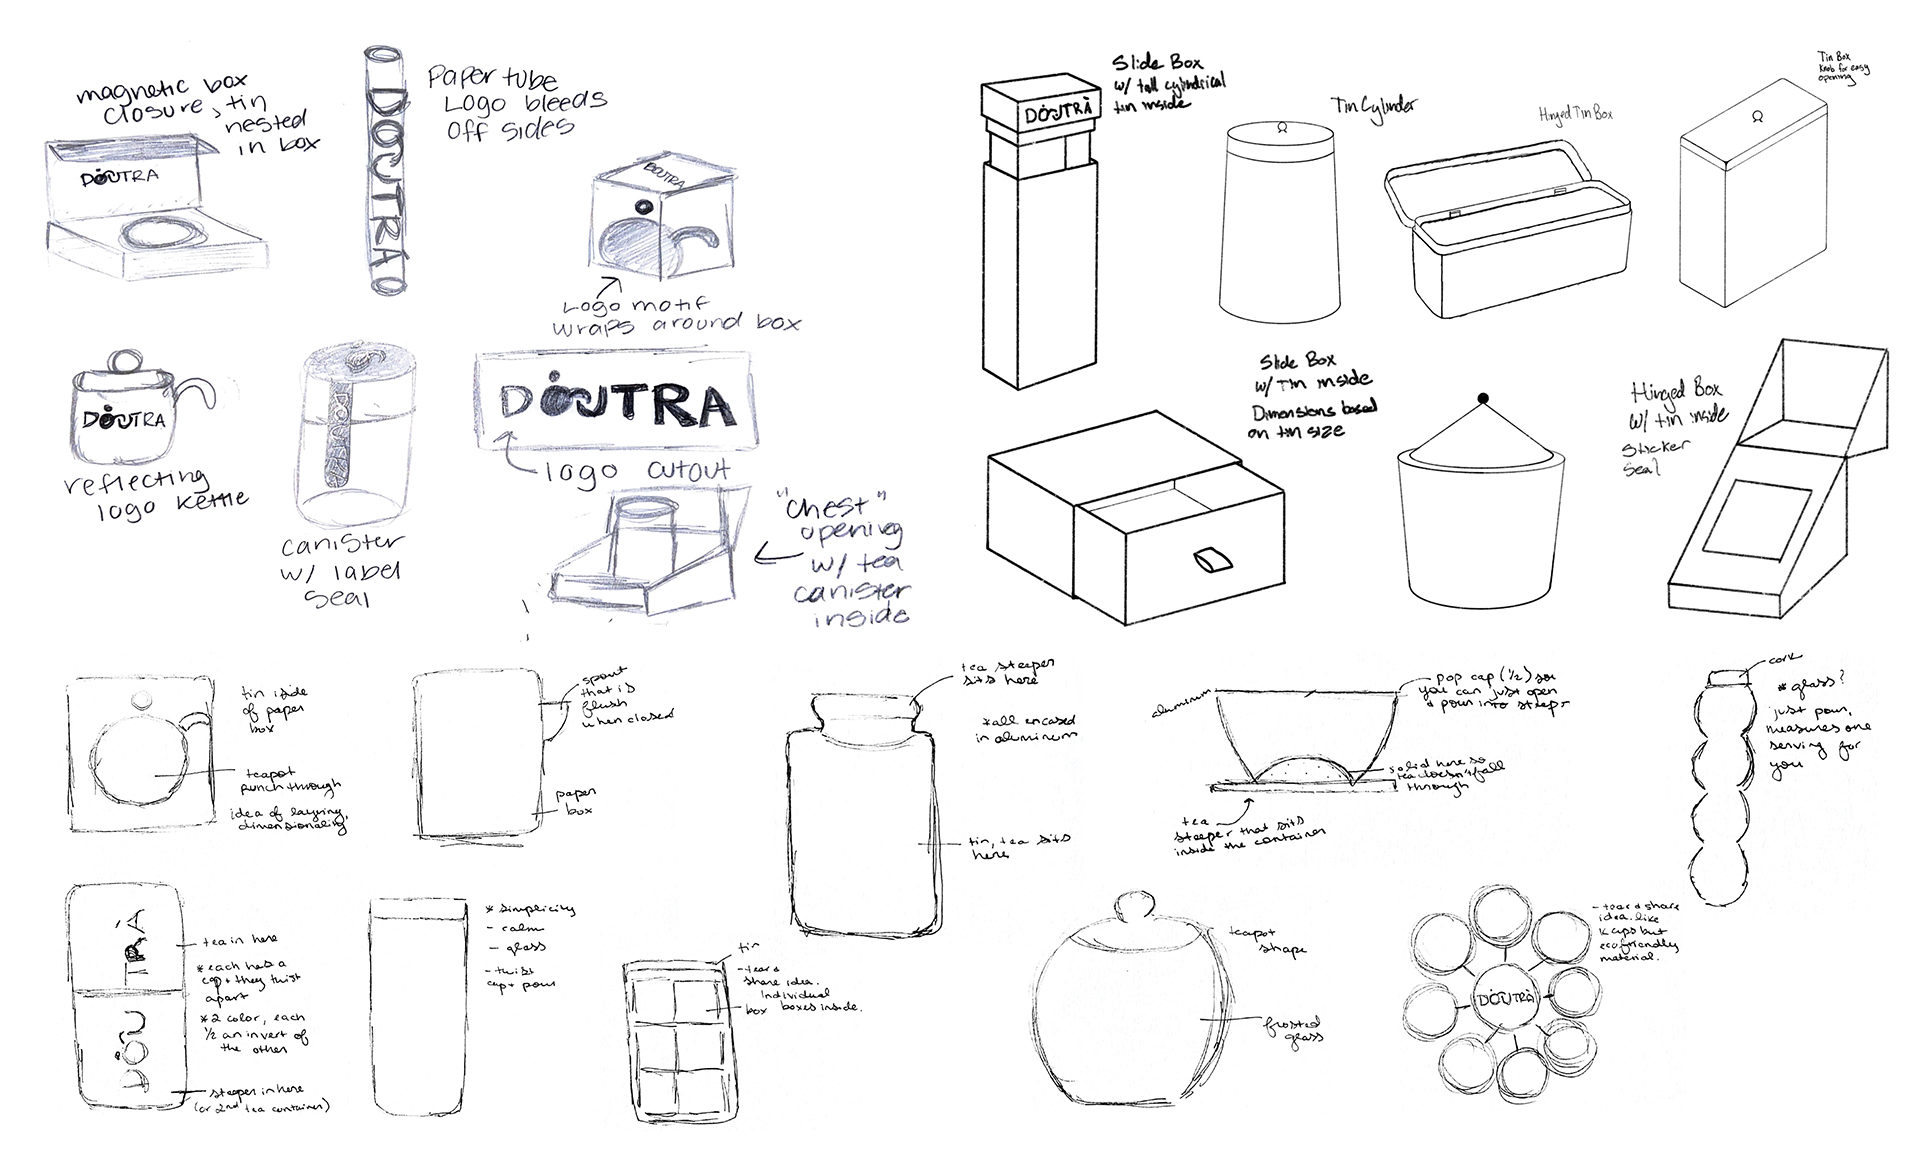 some of the initial package shape ideas